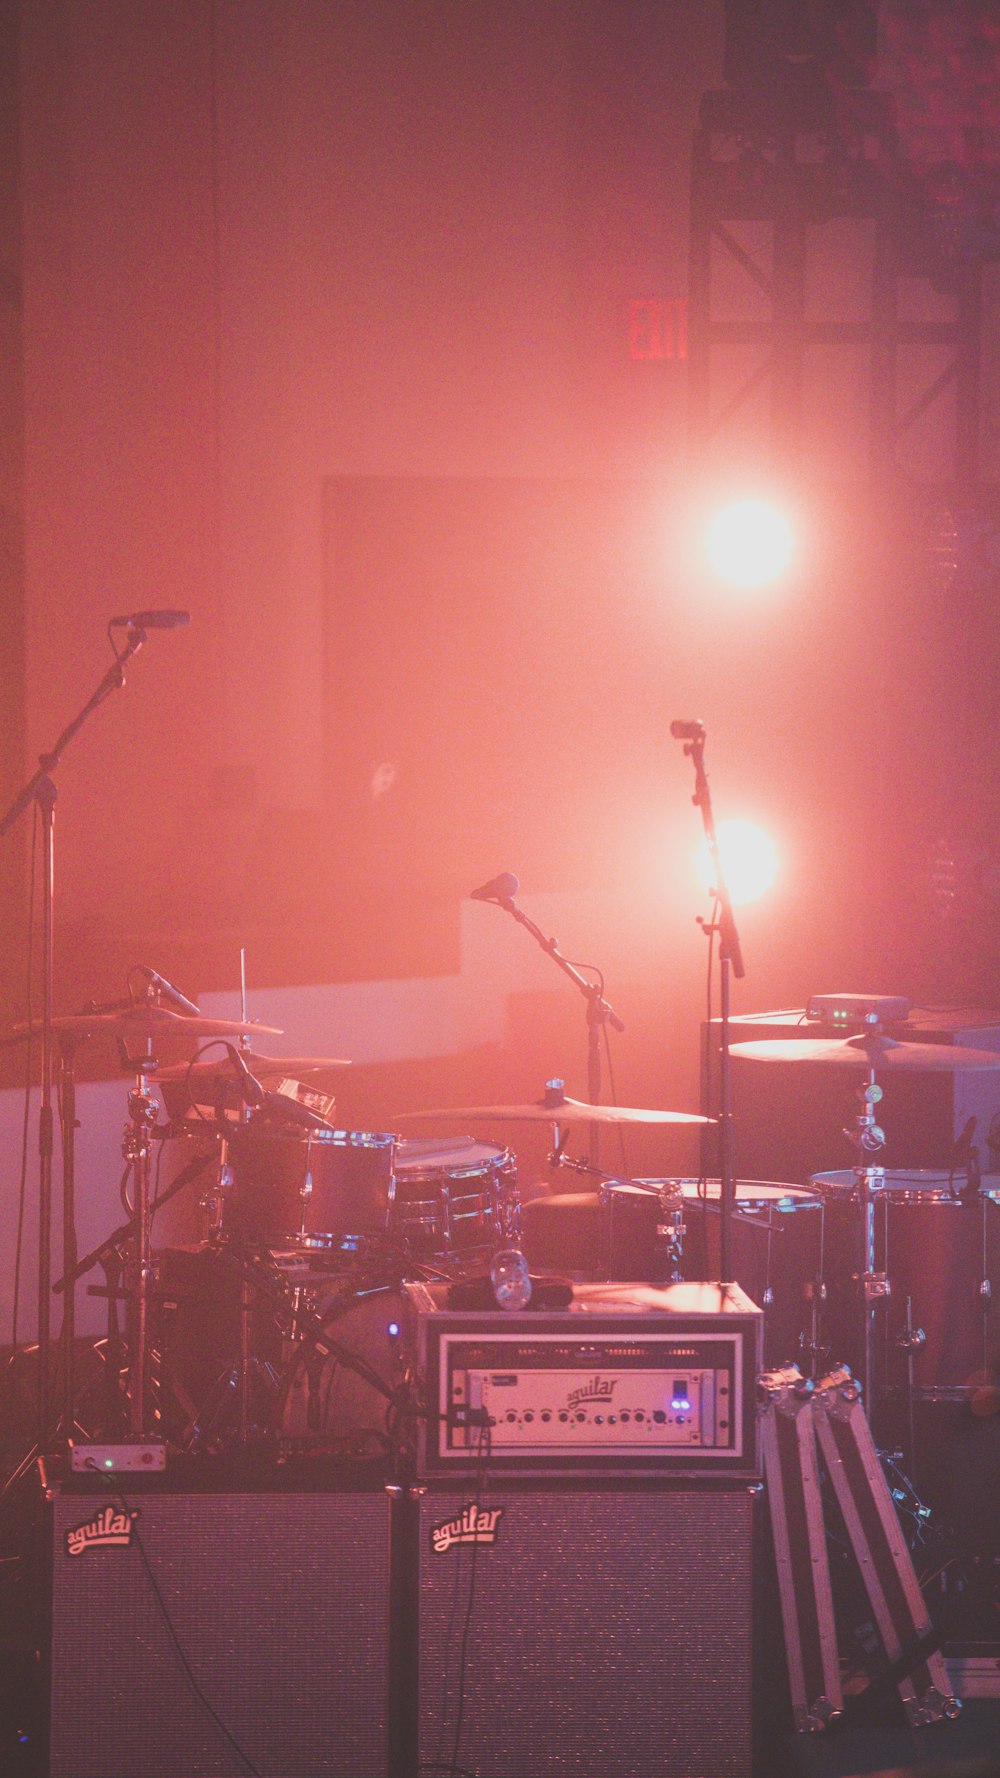 red drum set besides microphone stands